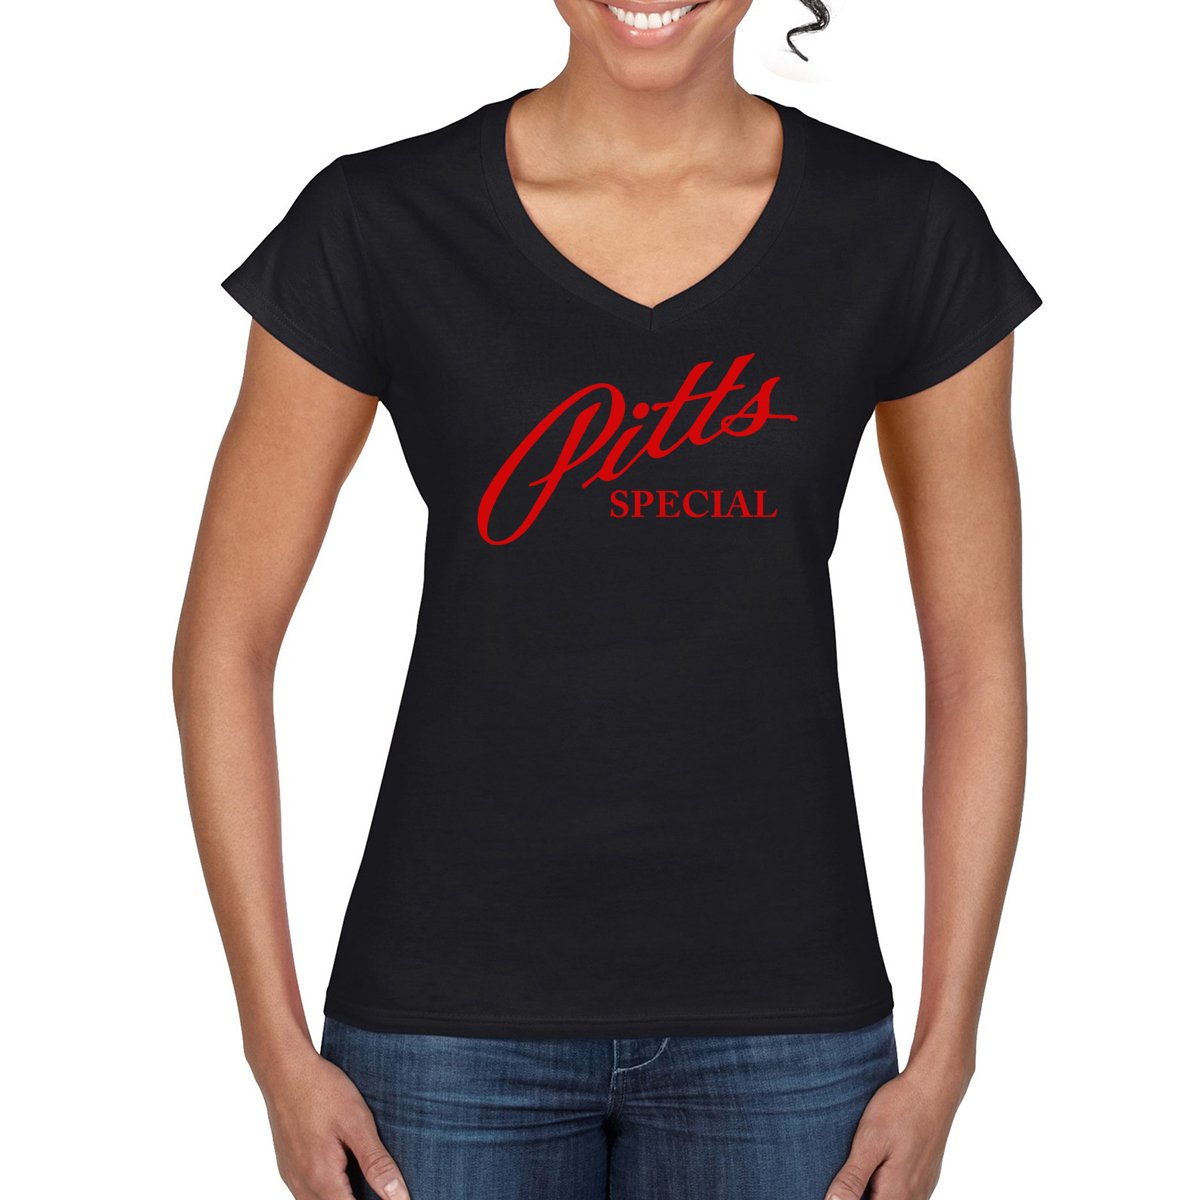 PITTS SPECIAL V-Neck T-Shirt